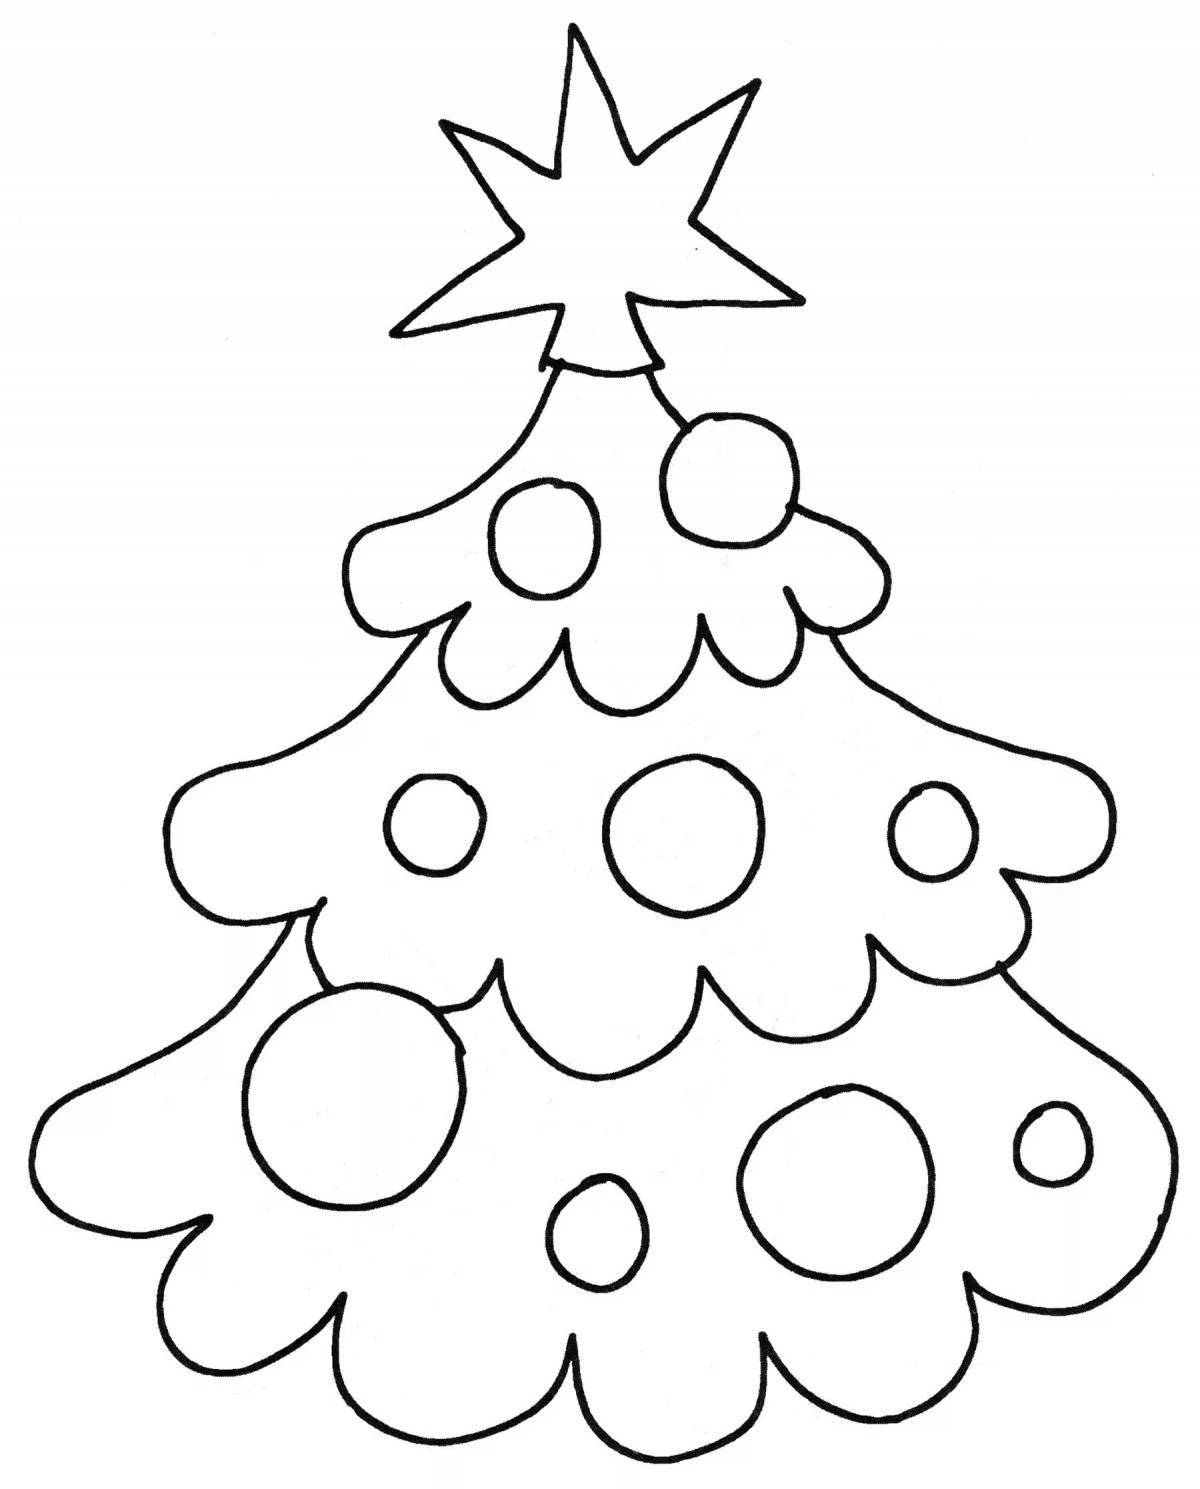 Dazzling Christmas tree with balls for children